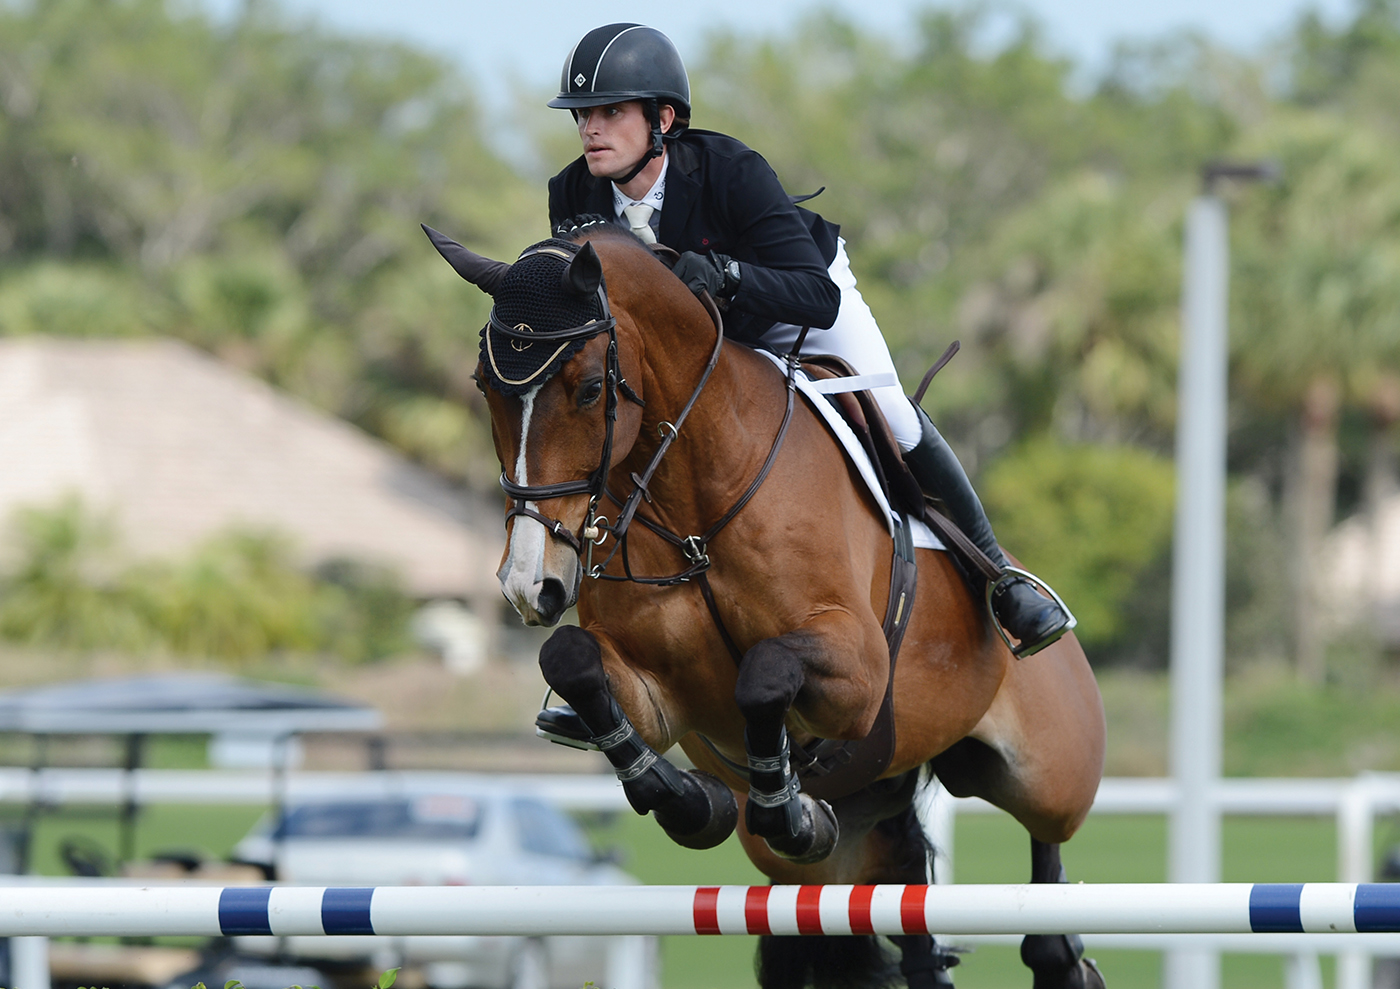 Palm Beach County, Florida, is home to numerous equine events, including the FTI Consulting Winter Equestrian Festival at the Palm Beach International Equestrian Center. Image from Larry Marano/Getty Images